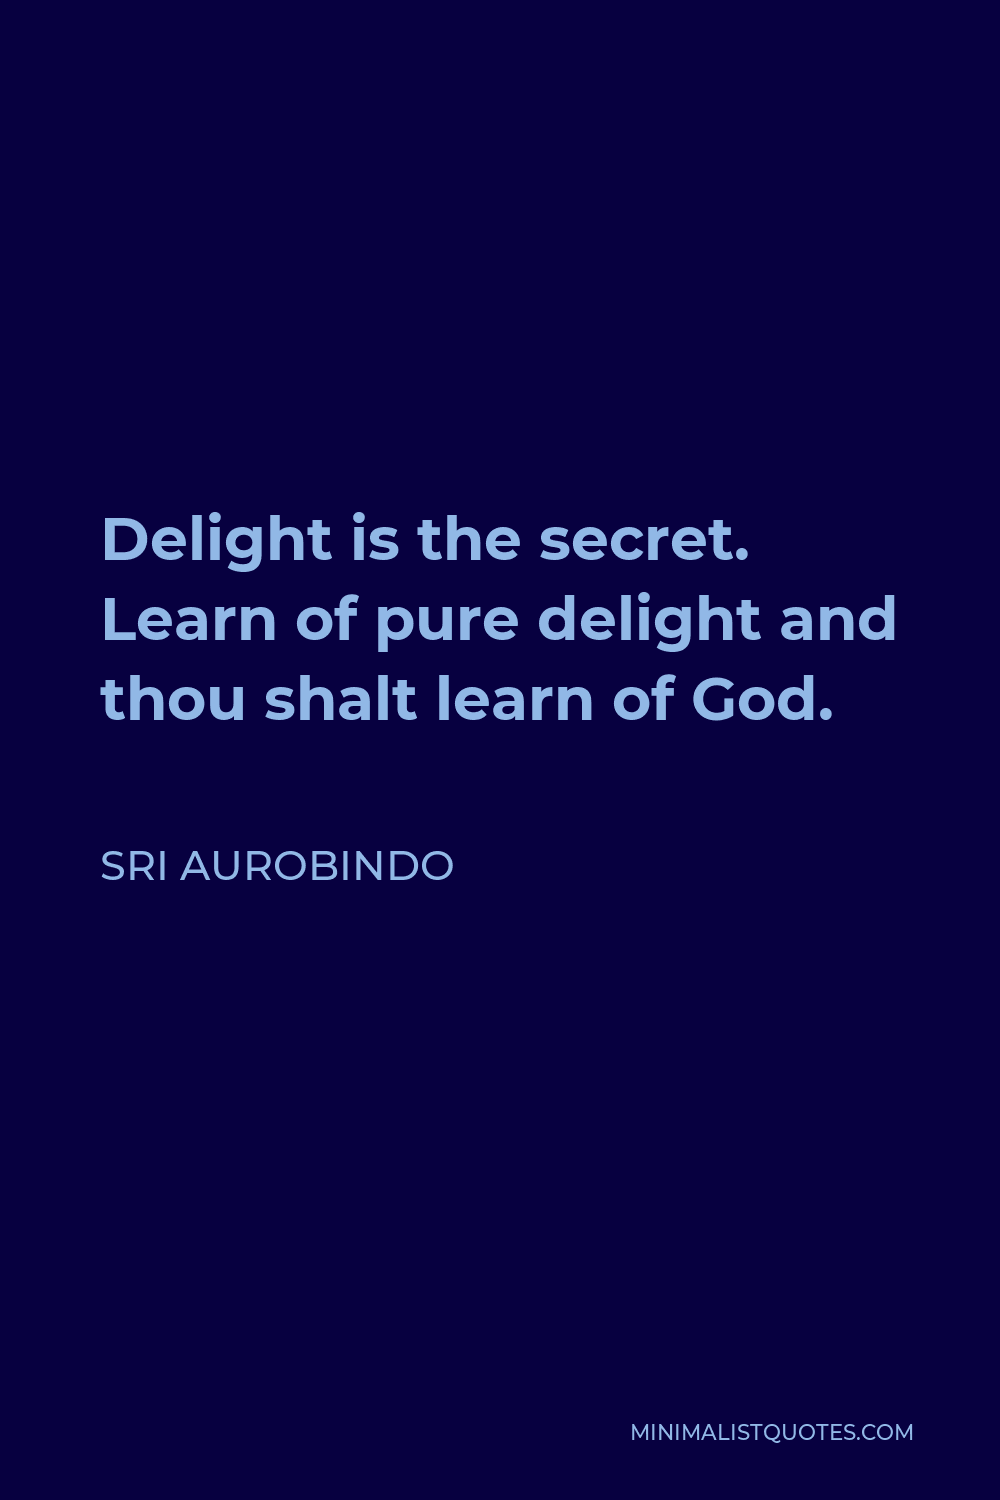 Sri Aurobindo Quote - Delight is the secret. Learn of pure delight and thou shalt learn of God.